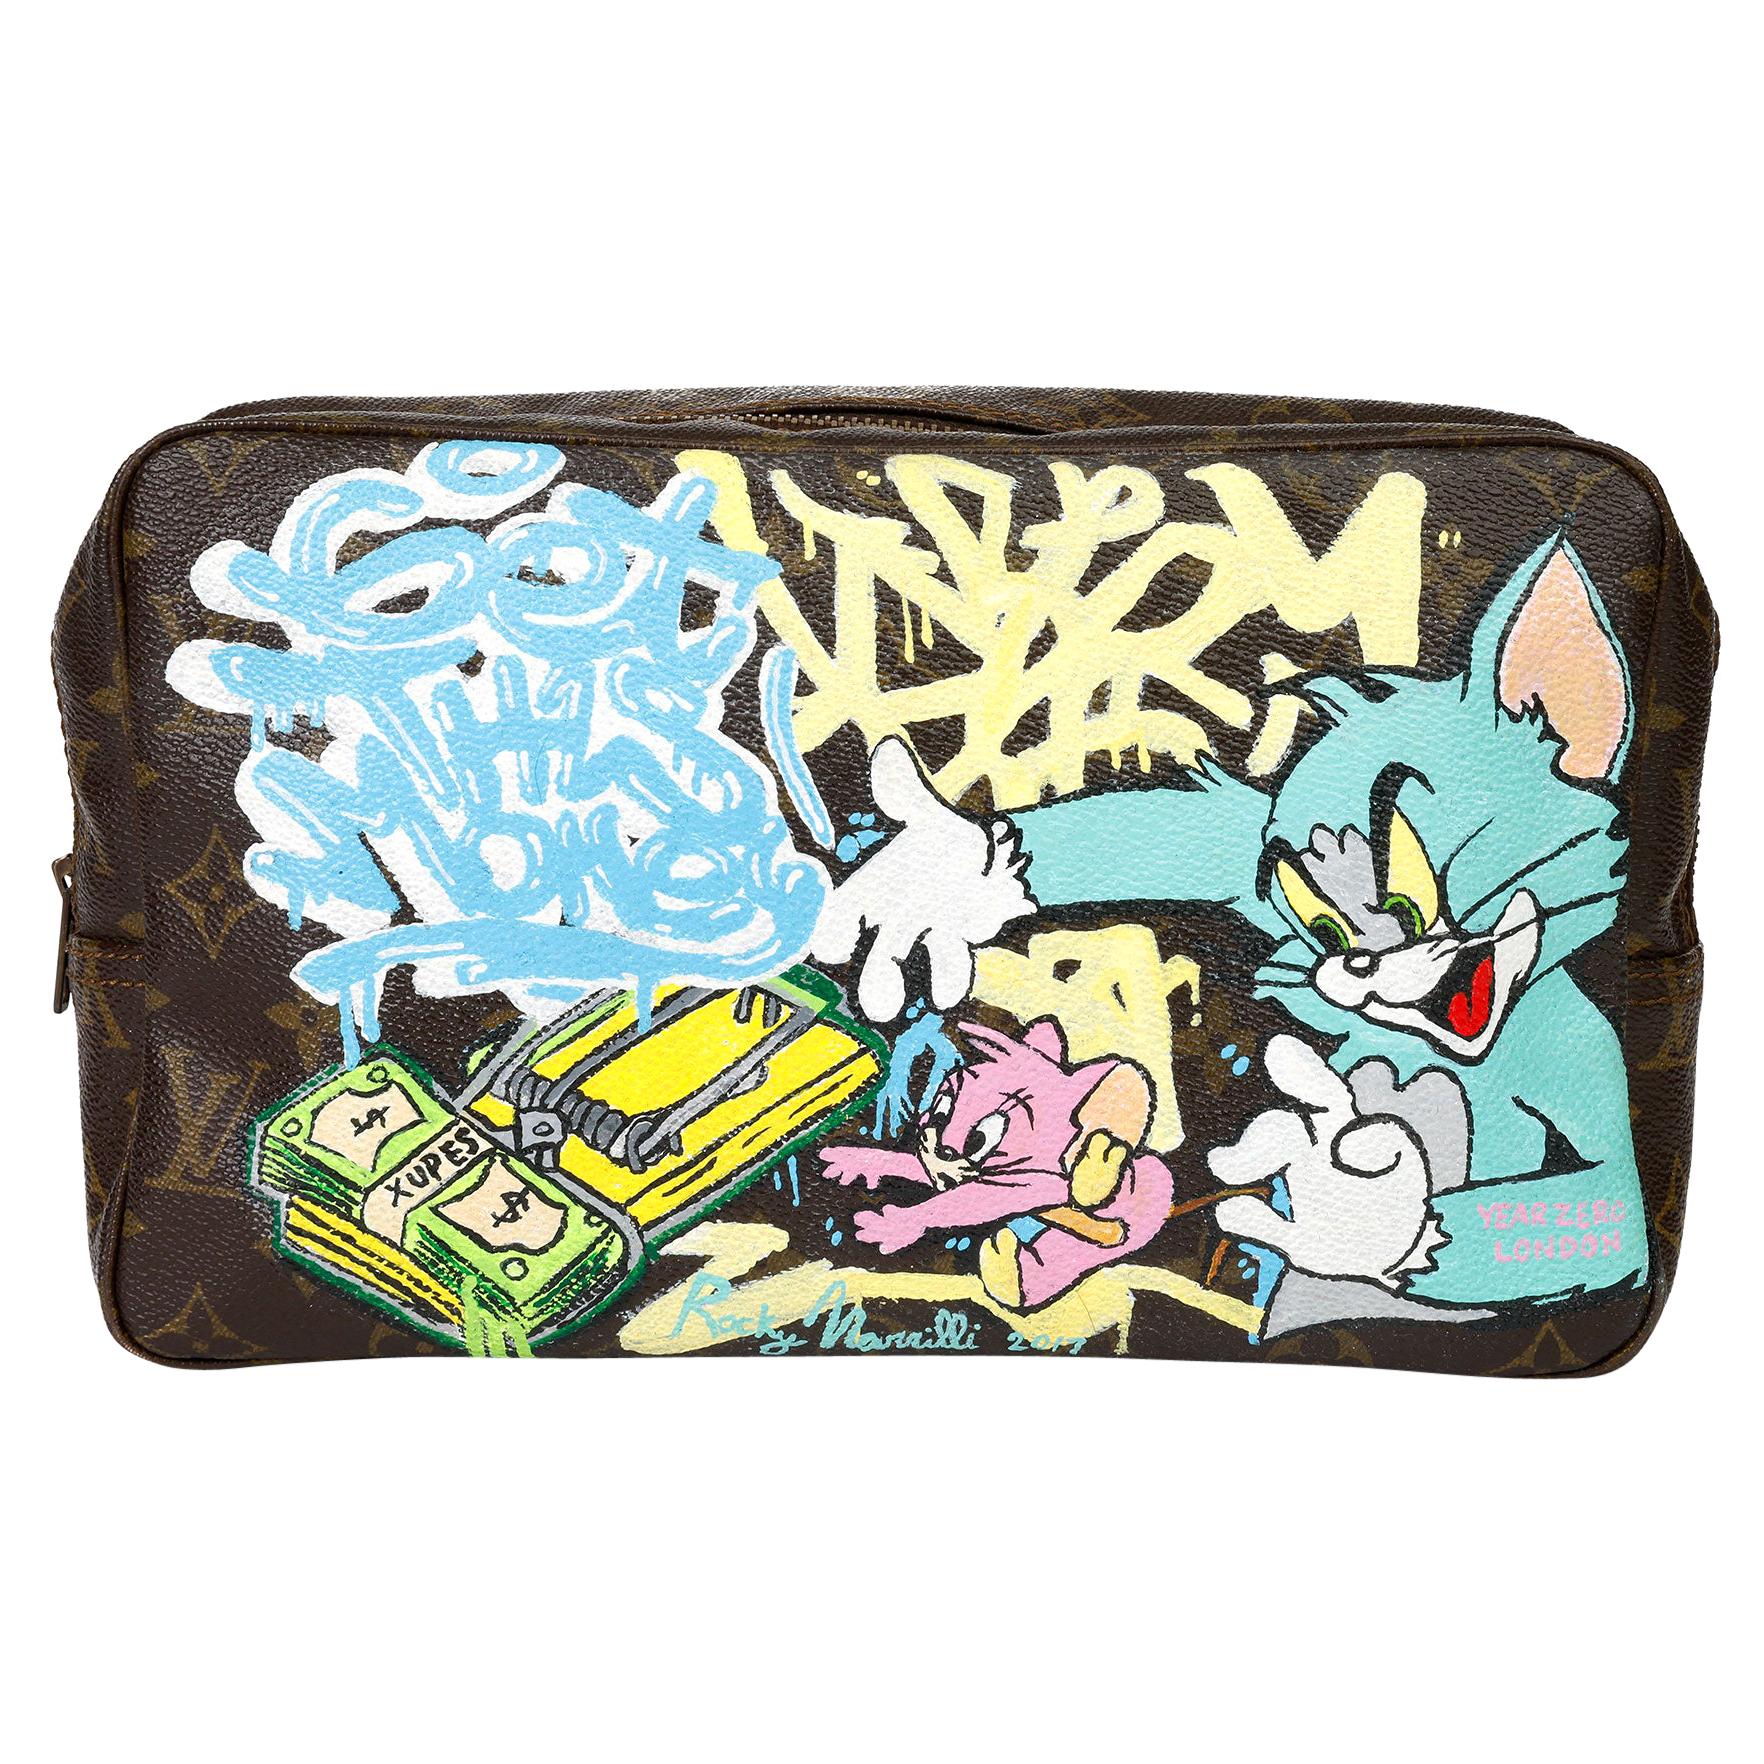 Louis Vuitton Hand-painted 'Get This Money' X Year Zero London Toiletry Pouch